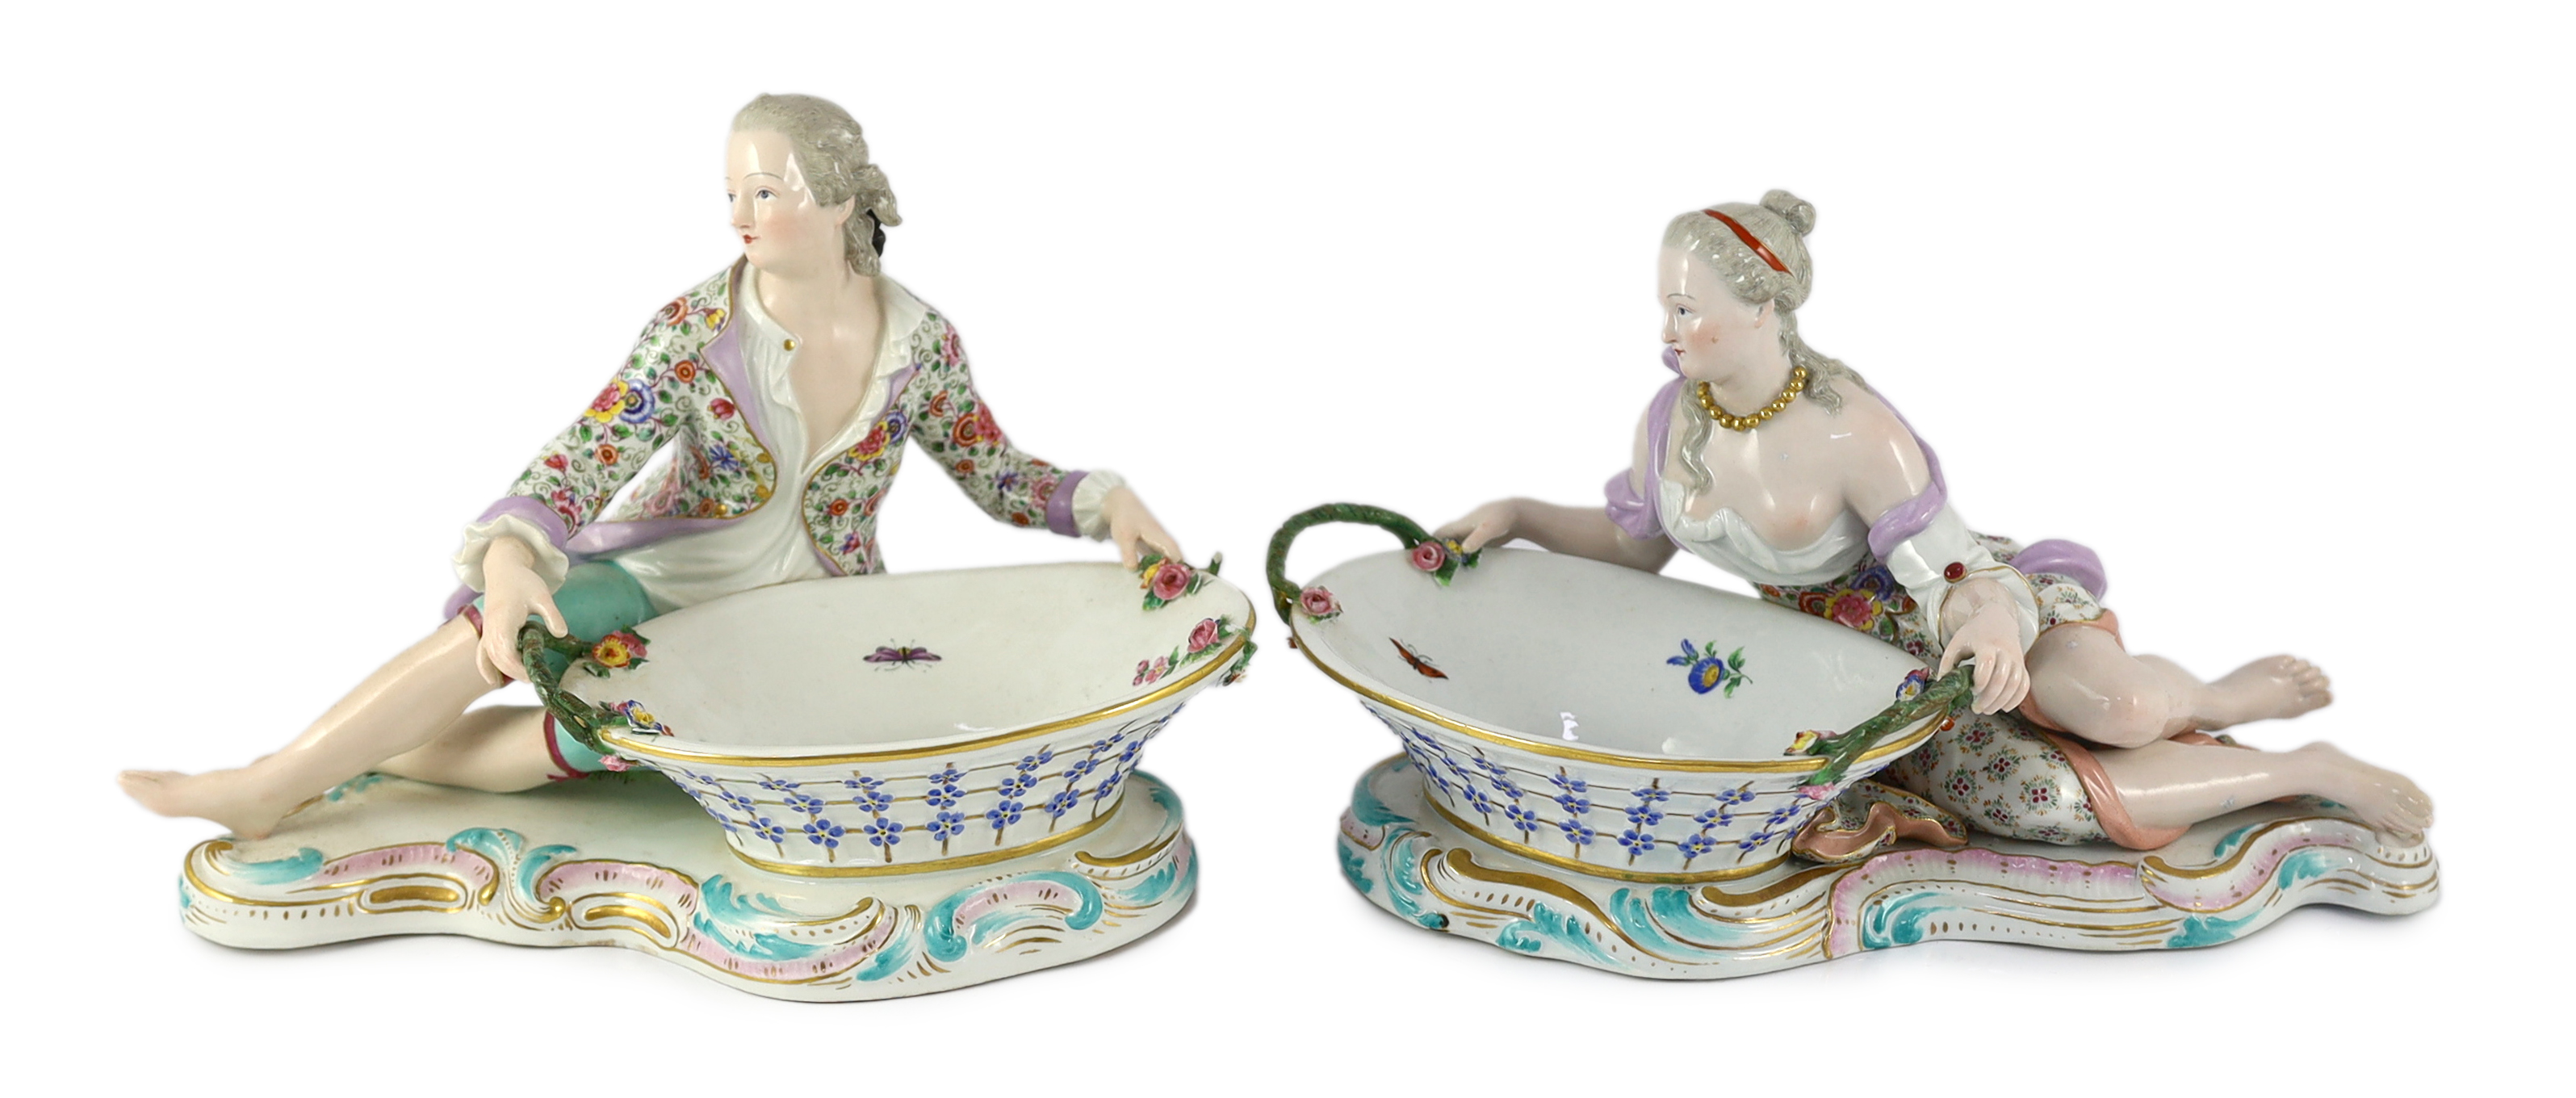 A pair of large Meissen figural bonbon dishes, 19th century                                                                                                                                                                 